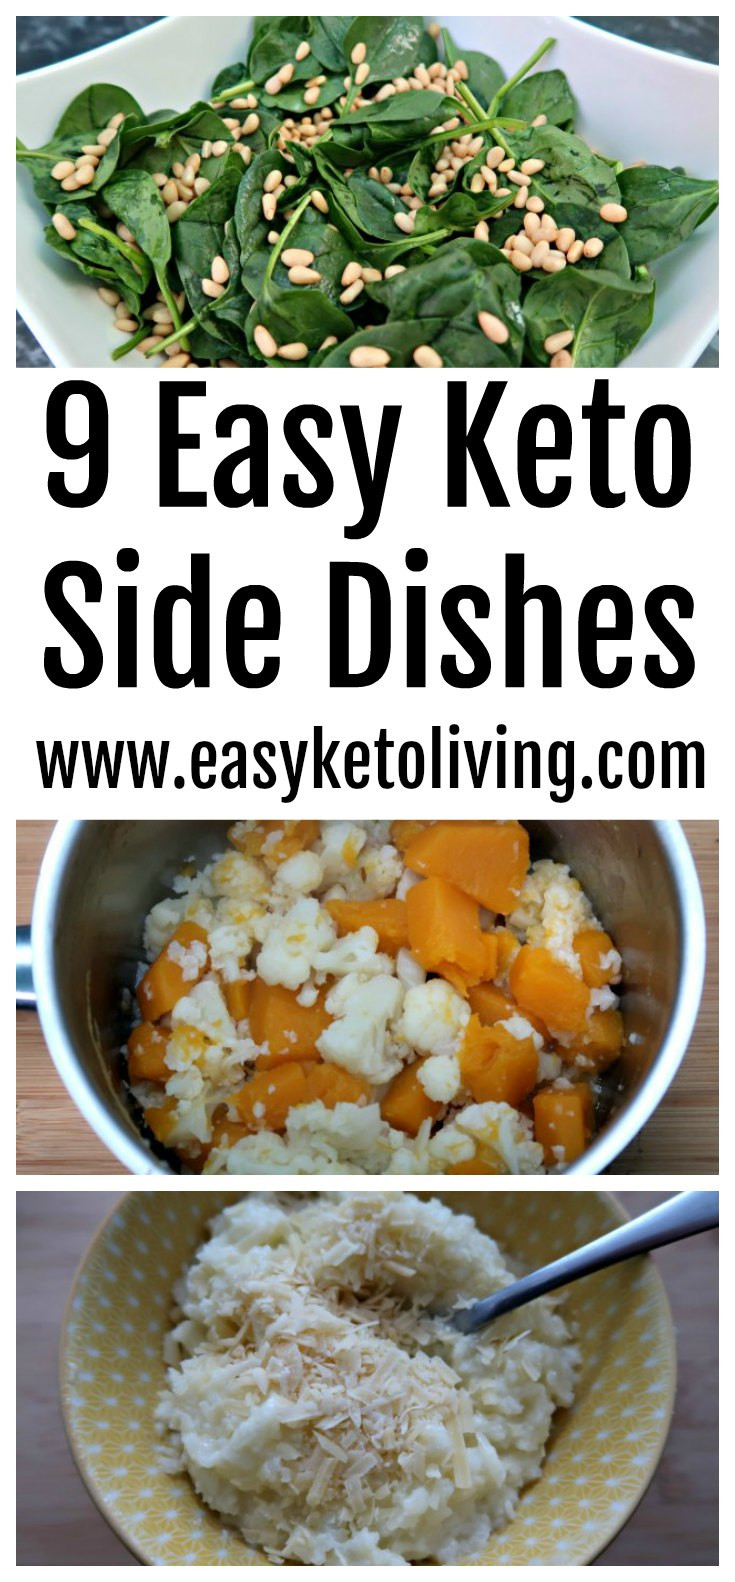 15 Trendy Easy Keto Sides - Best Product Reviews